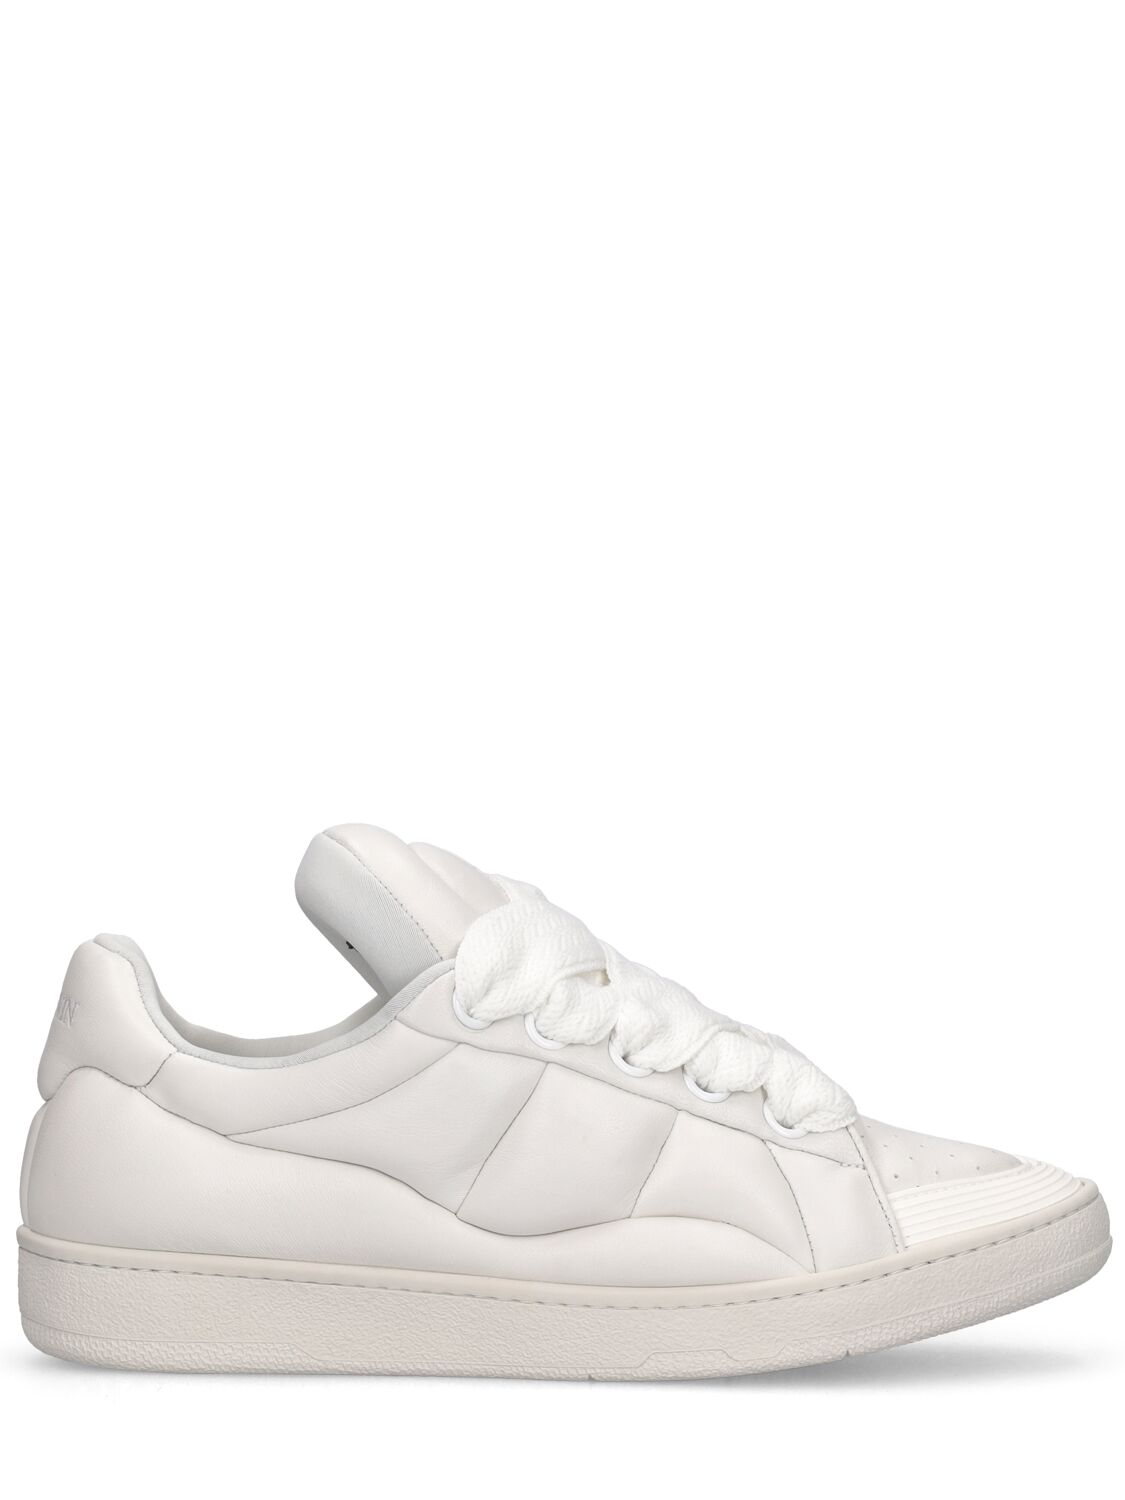 Image of Xl Curb Leather Low Top Sneakers